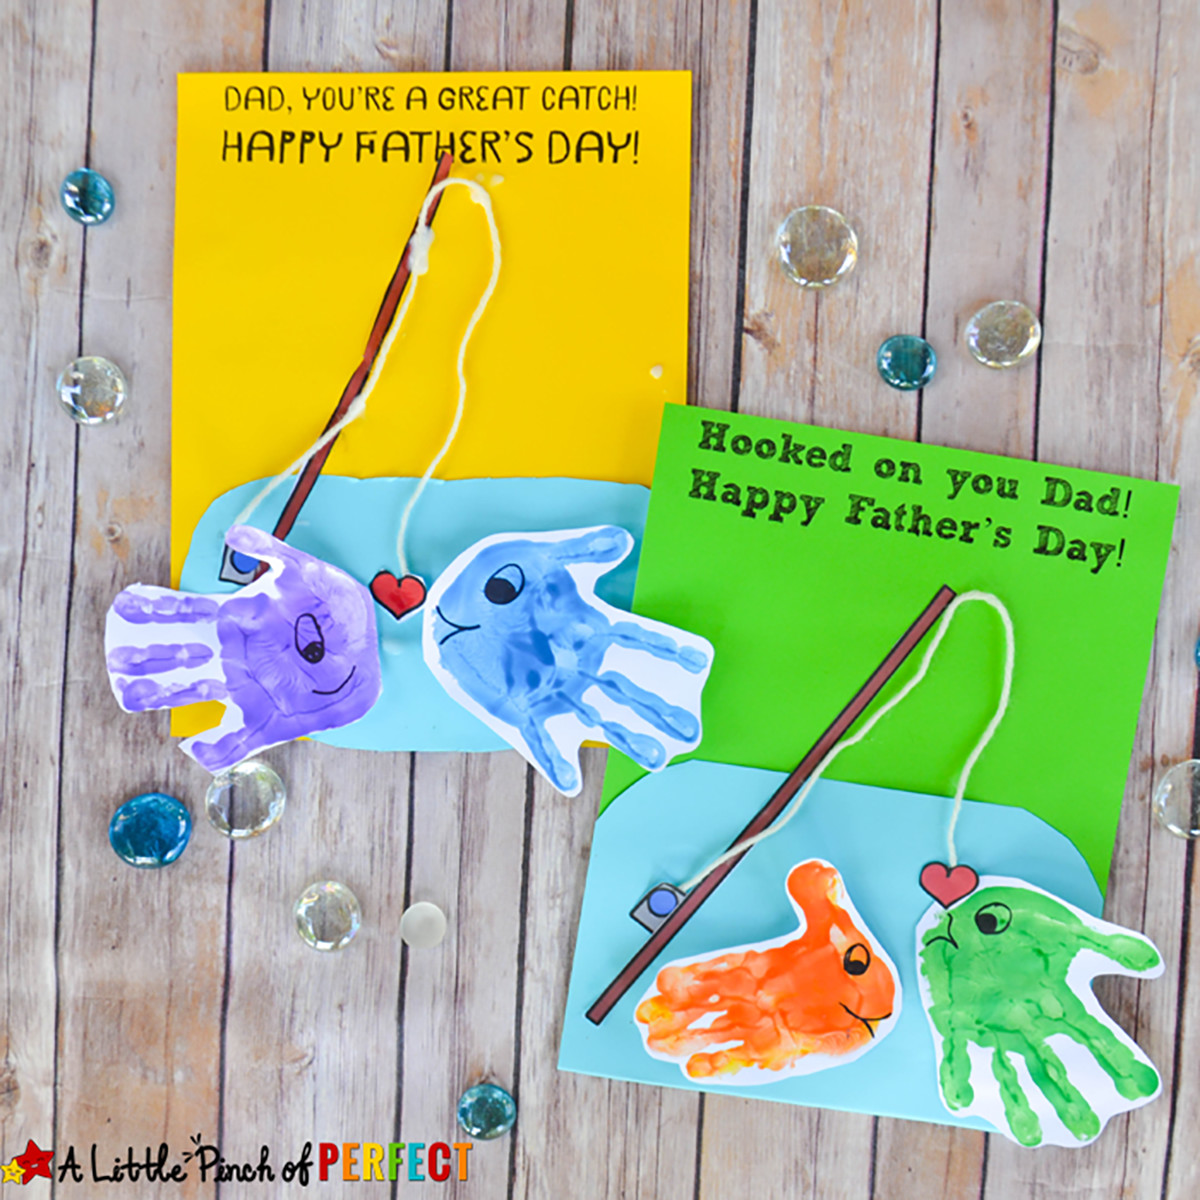 Father'S Day Gift Ideas From Preschoolers
 DIY Preschool Father s Day Gifts Your Little es Will